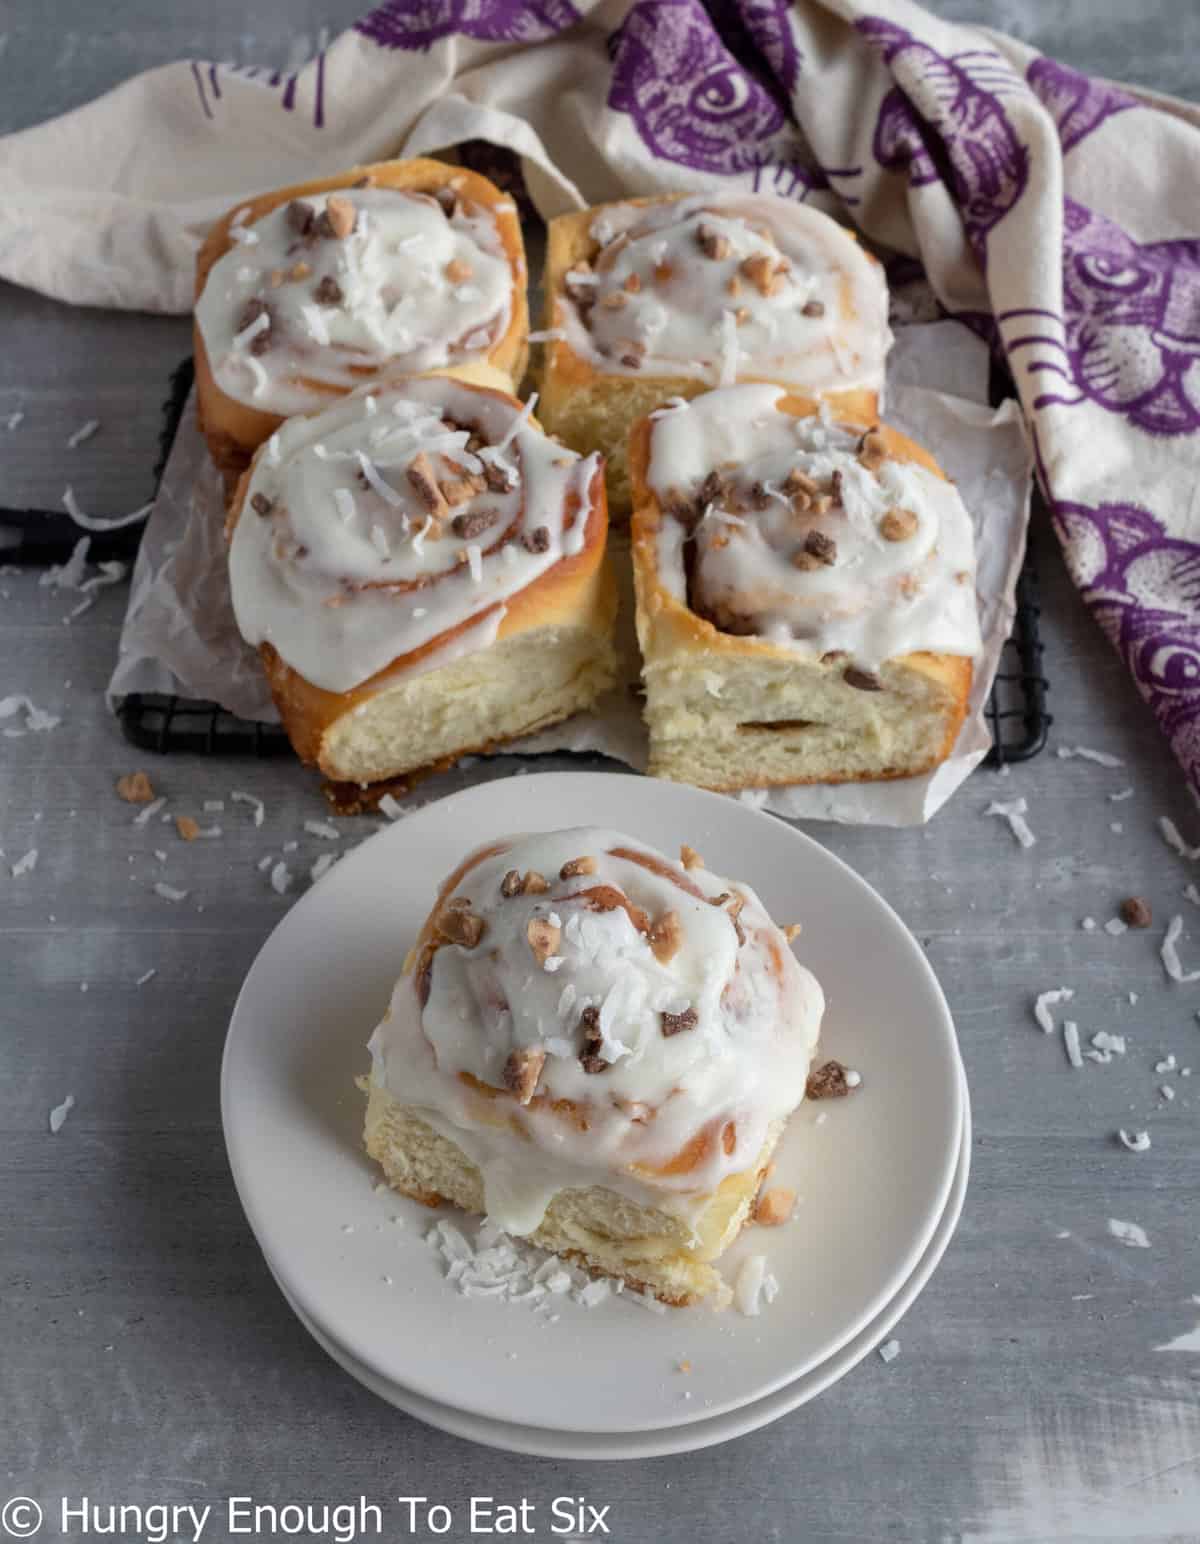 Five large sweet buns with white frosting.